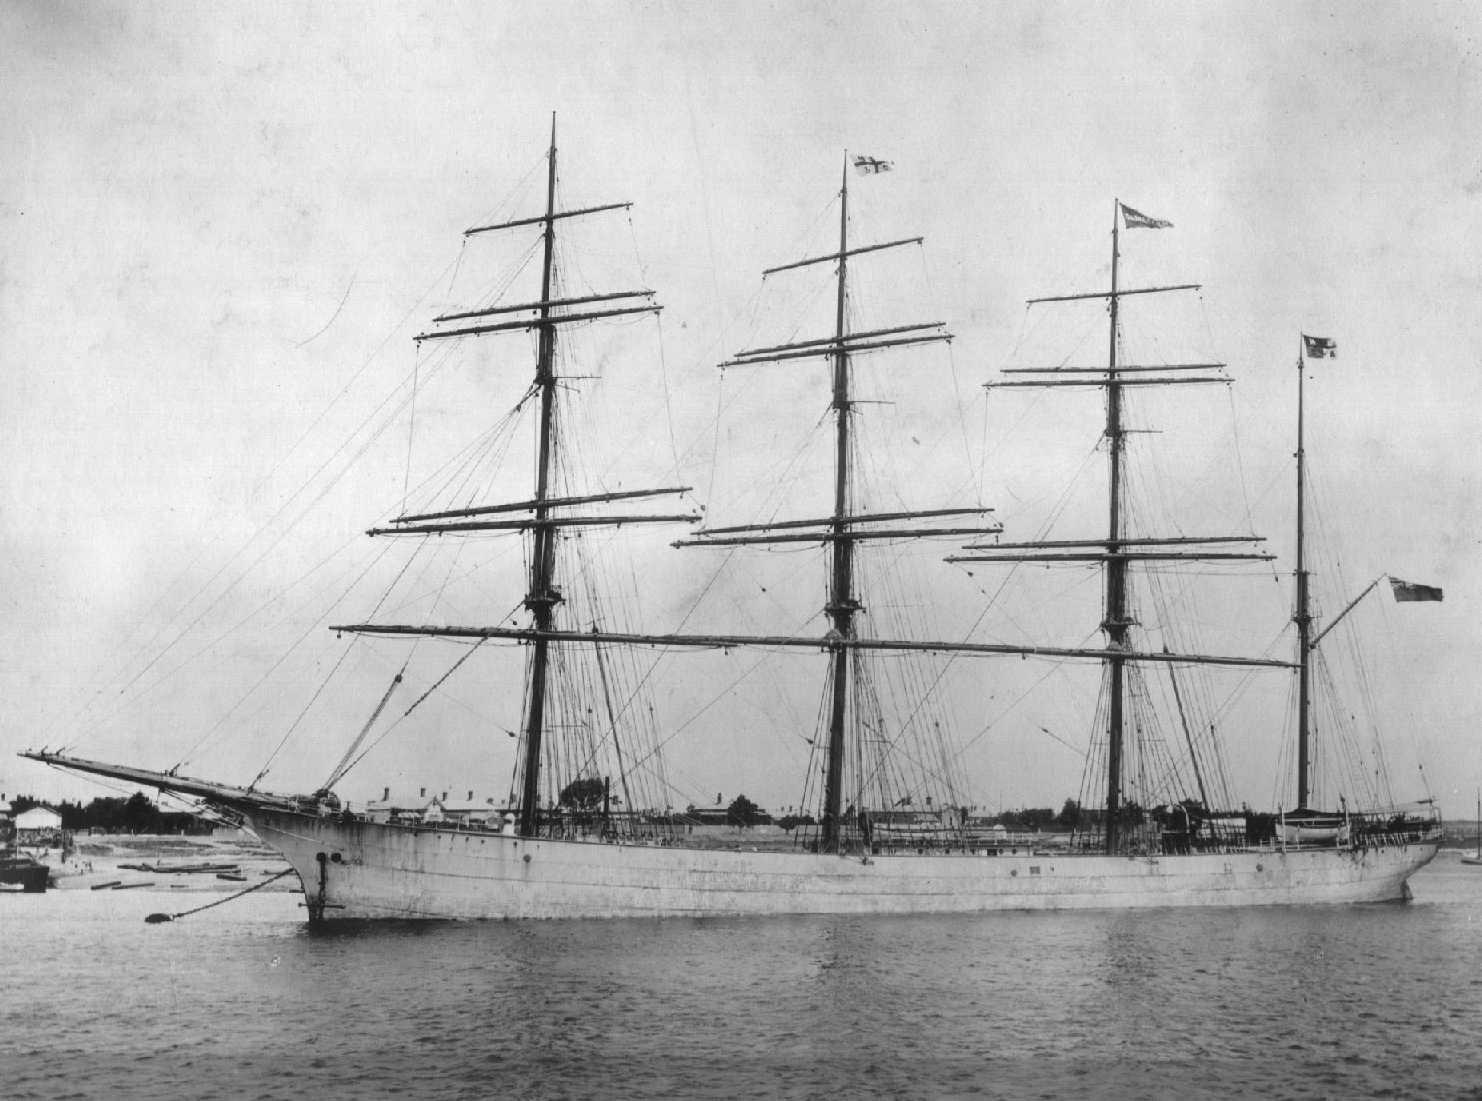 Steel 4 masted Barque, "Samaritan", buyilt in 1891 at Glasgow by R Duncan & Co for Mac Vicar, Marshall & Co.
Official Number:  97871
Dimensions:  length 282', breadth 42', draught 25'
Port Of Registry:  Liverpool